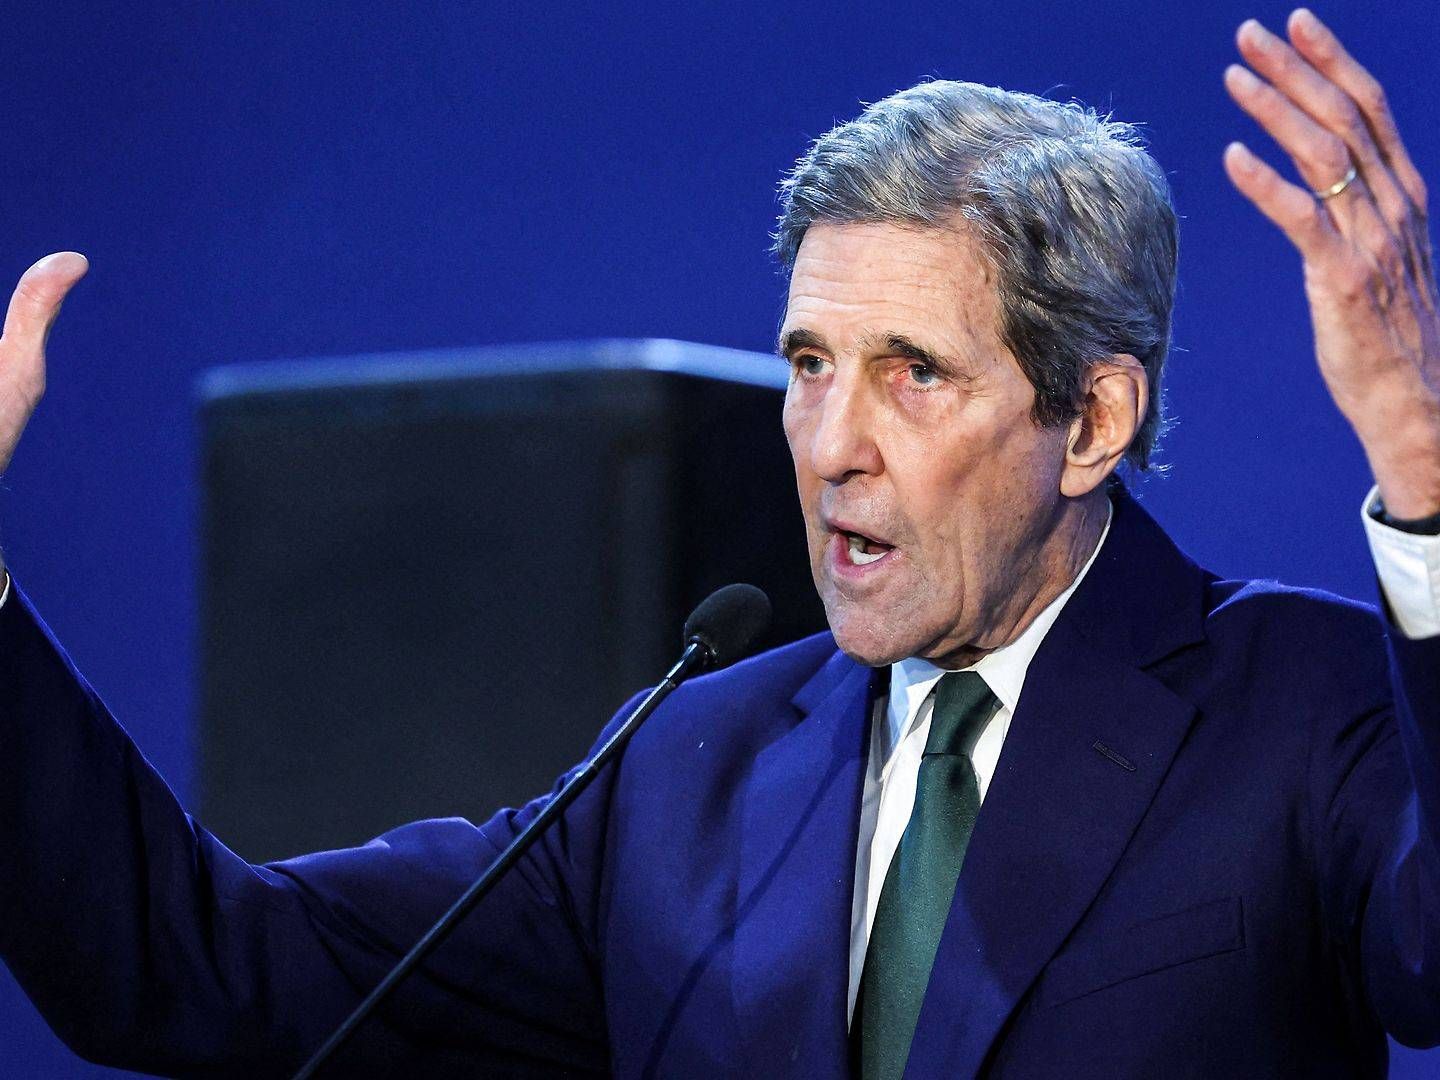 John Kerry, the US' special envoy for climate, partook in the launch of the Green Shipping Challenge at the COP 27 summit. | Photo: Ahmad Gharabli/AFP/Ritzau Scanpix